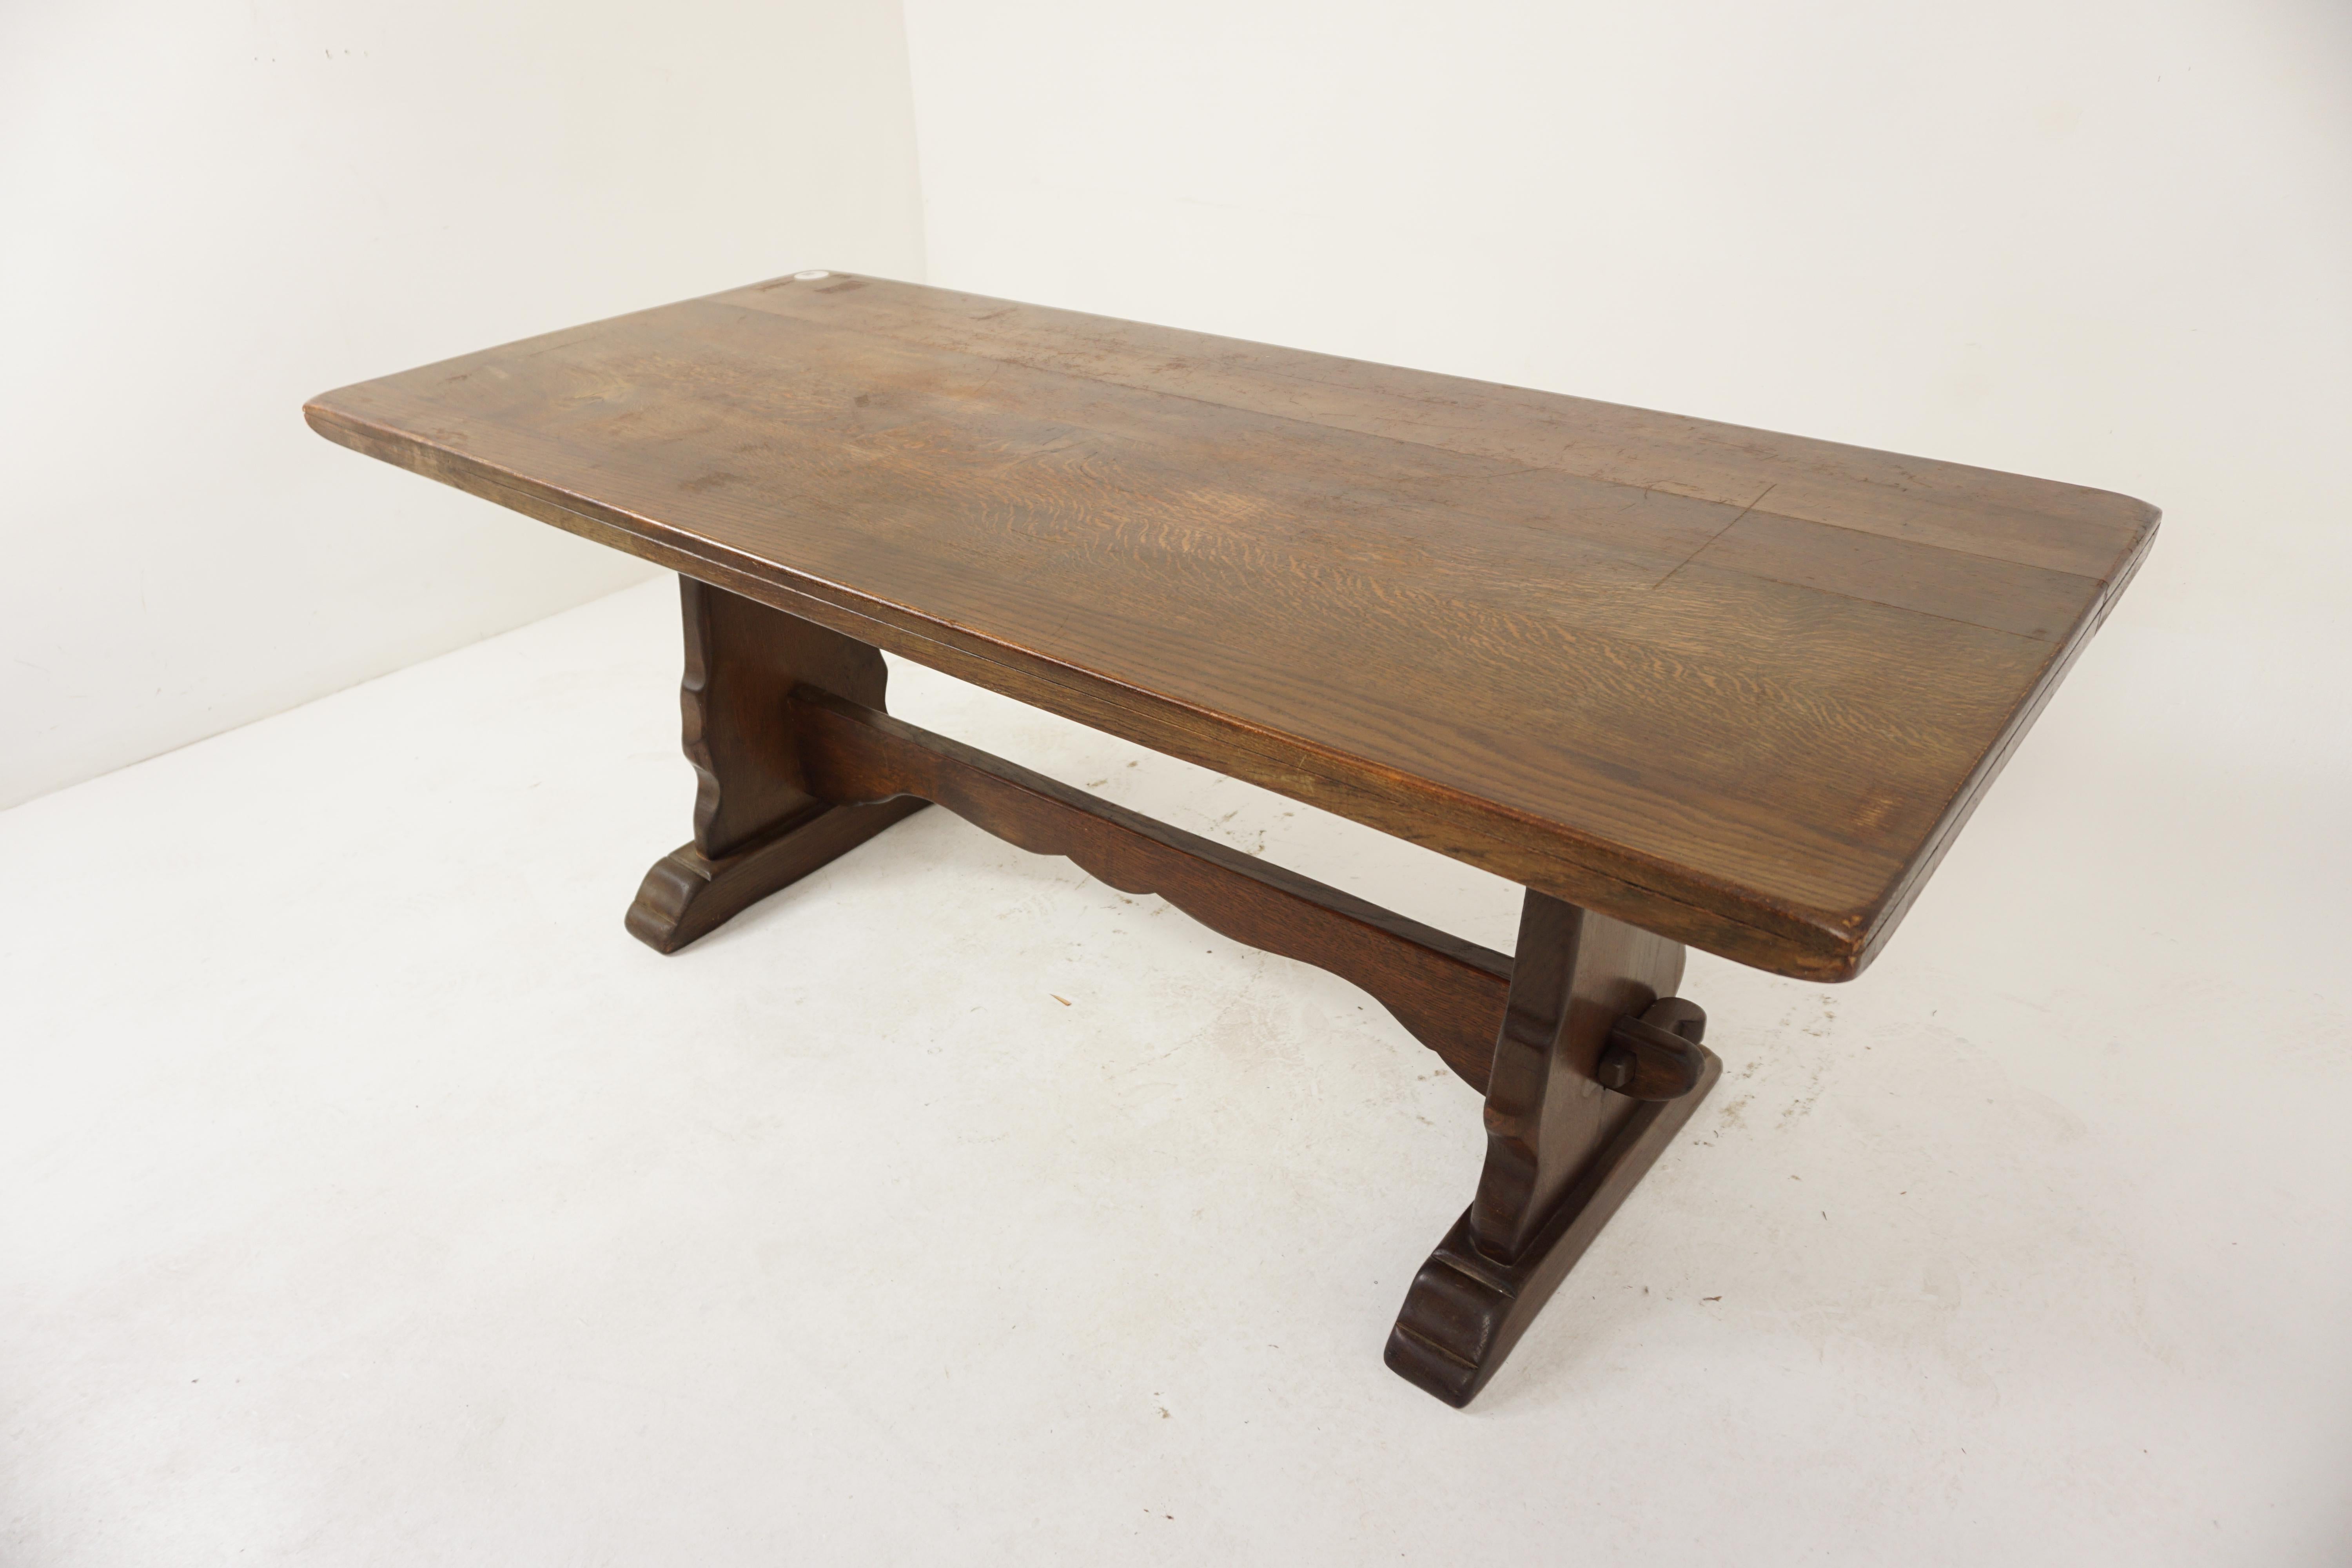 Vintage Solid Oak Refectory Dining Farmhouse Table, Scotland 1930, H1031

Scotland 1930
Solid Oak
Original Finish
Consisting of four solid planks to the top
The end supports are solid oak and are joined by a heavy wavy base stretcher and held by